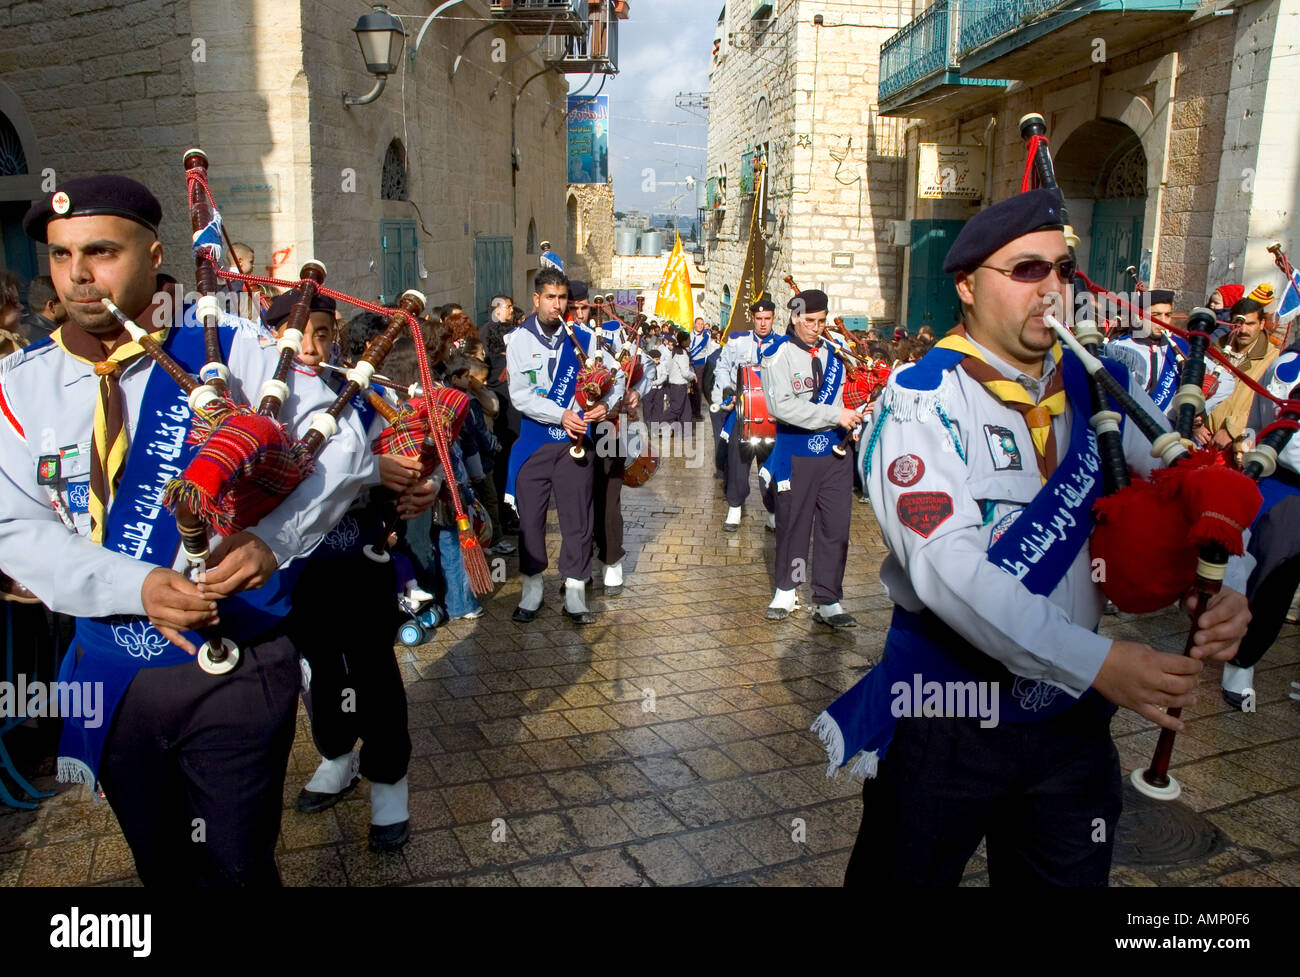 Palestinian Authority Bethlehem near Manger Square scouts pipe band marching through bethelehem streets with people watching Stock Photo